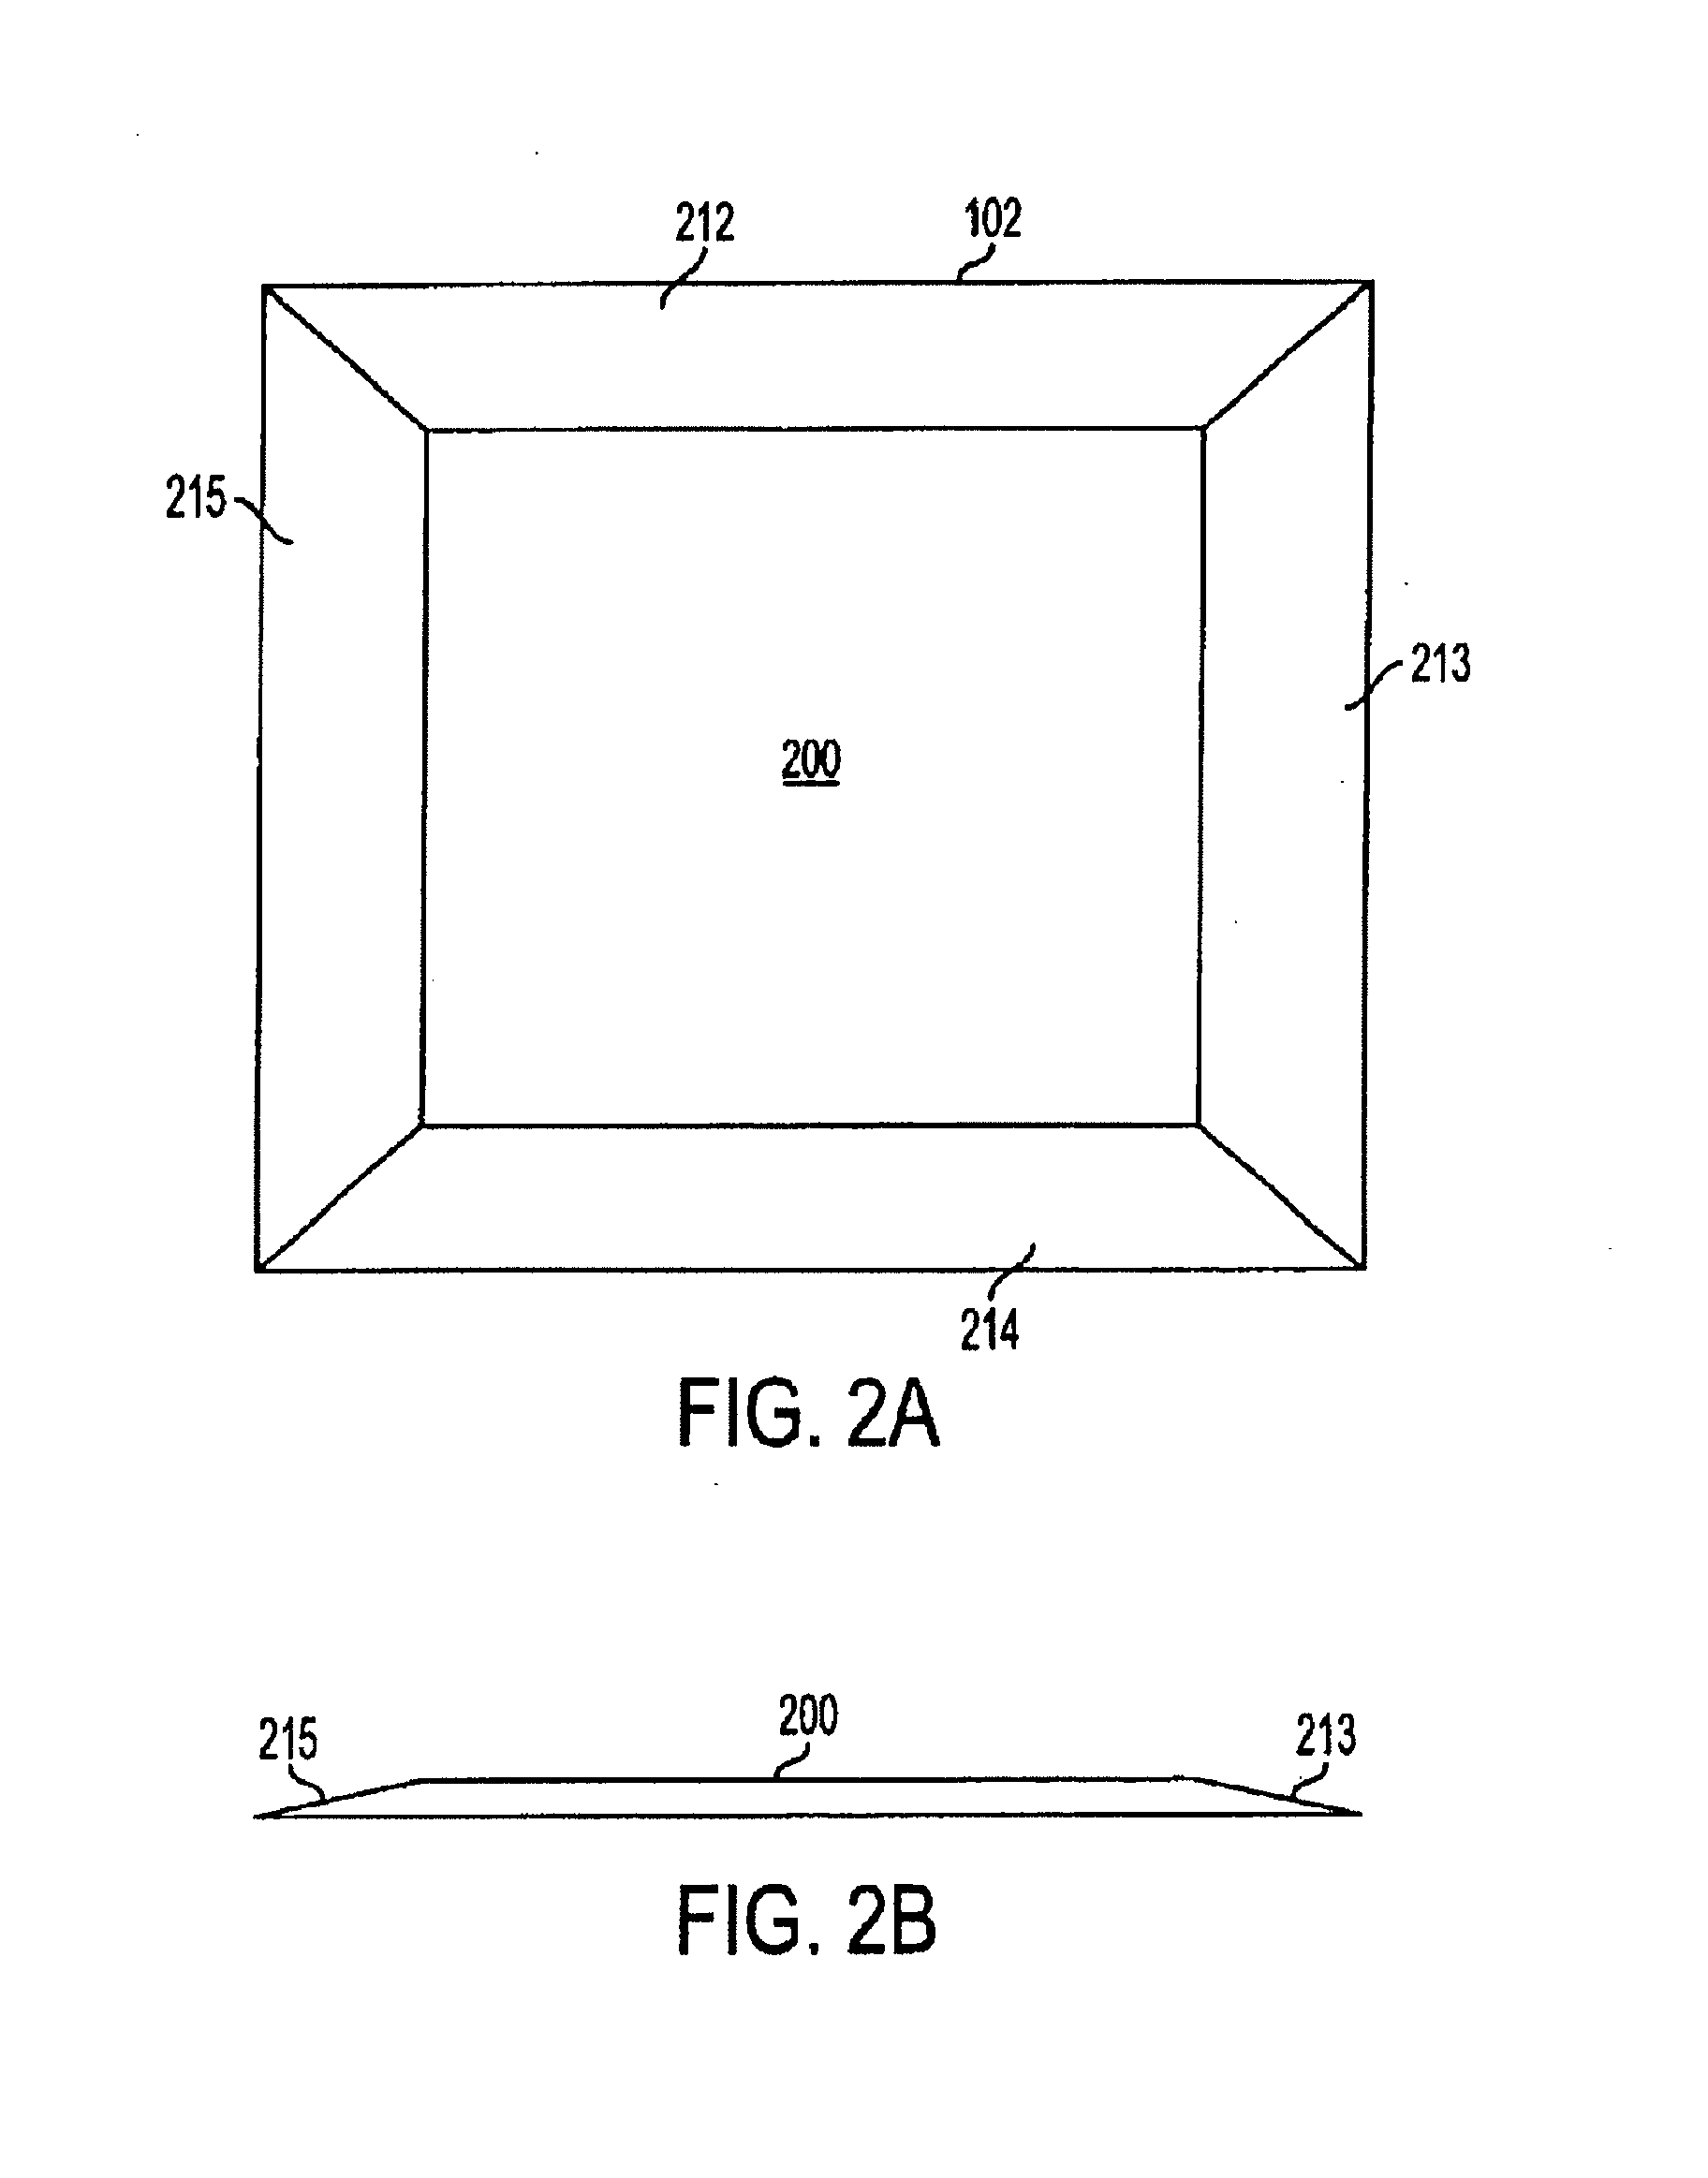 Floor display system with interactive features and variable image rotation